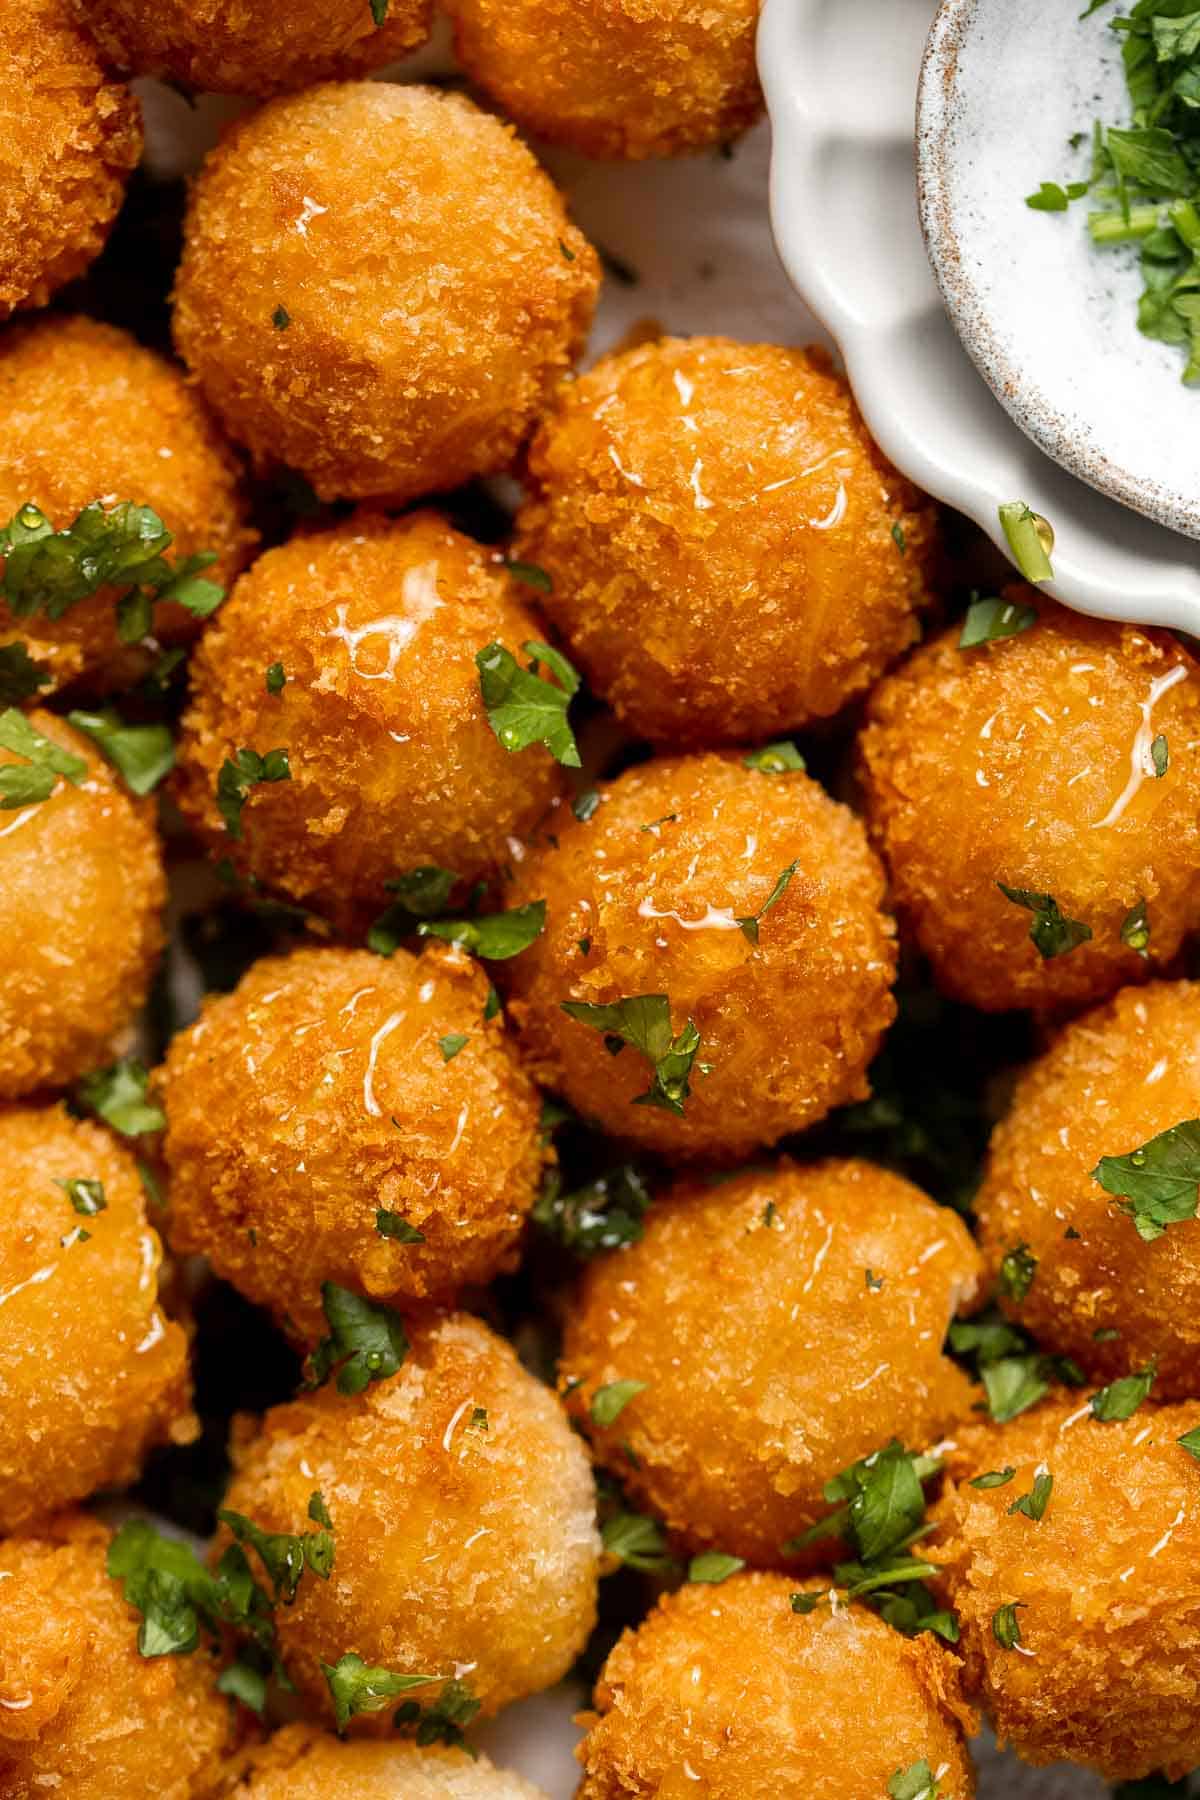 Fried Goat Cheese Balls are flavorful, delicious, and easy to make. With creamy, melty cheese oozing out of a crunchy, golden crust in every bite. | aheadofthyme.com